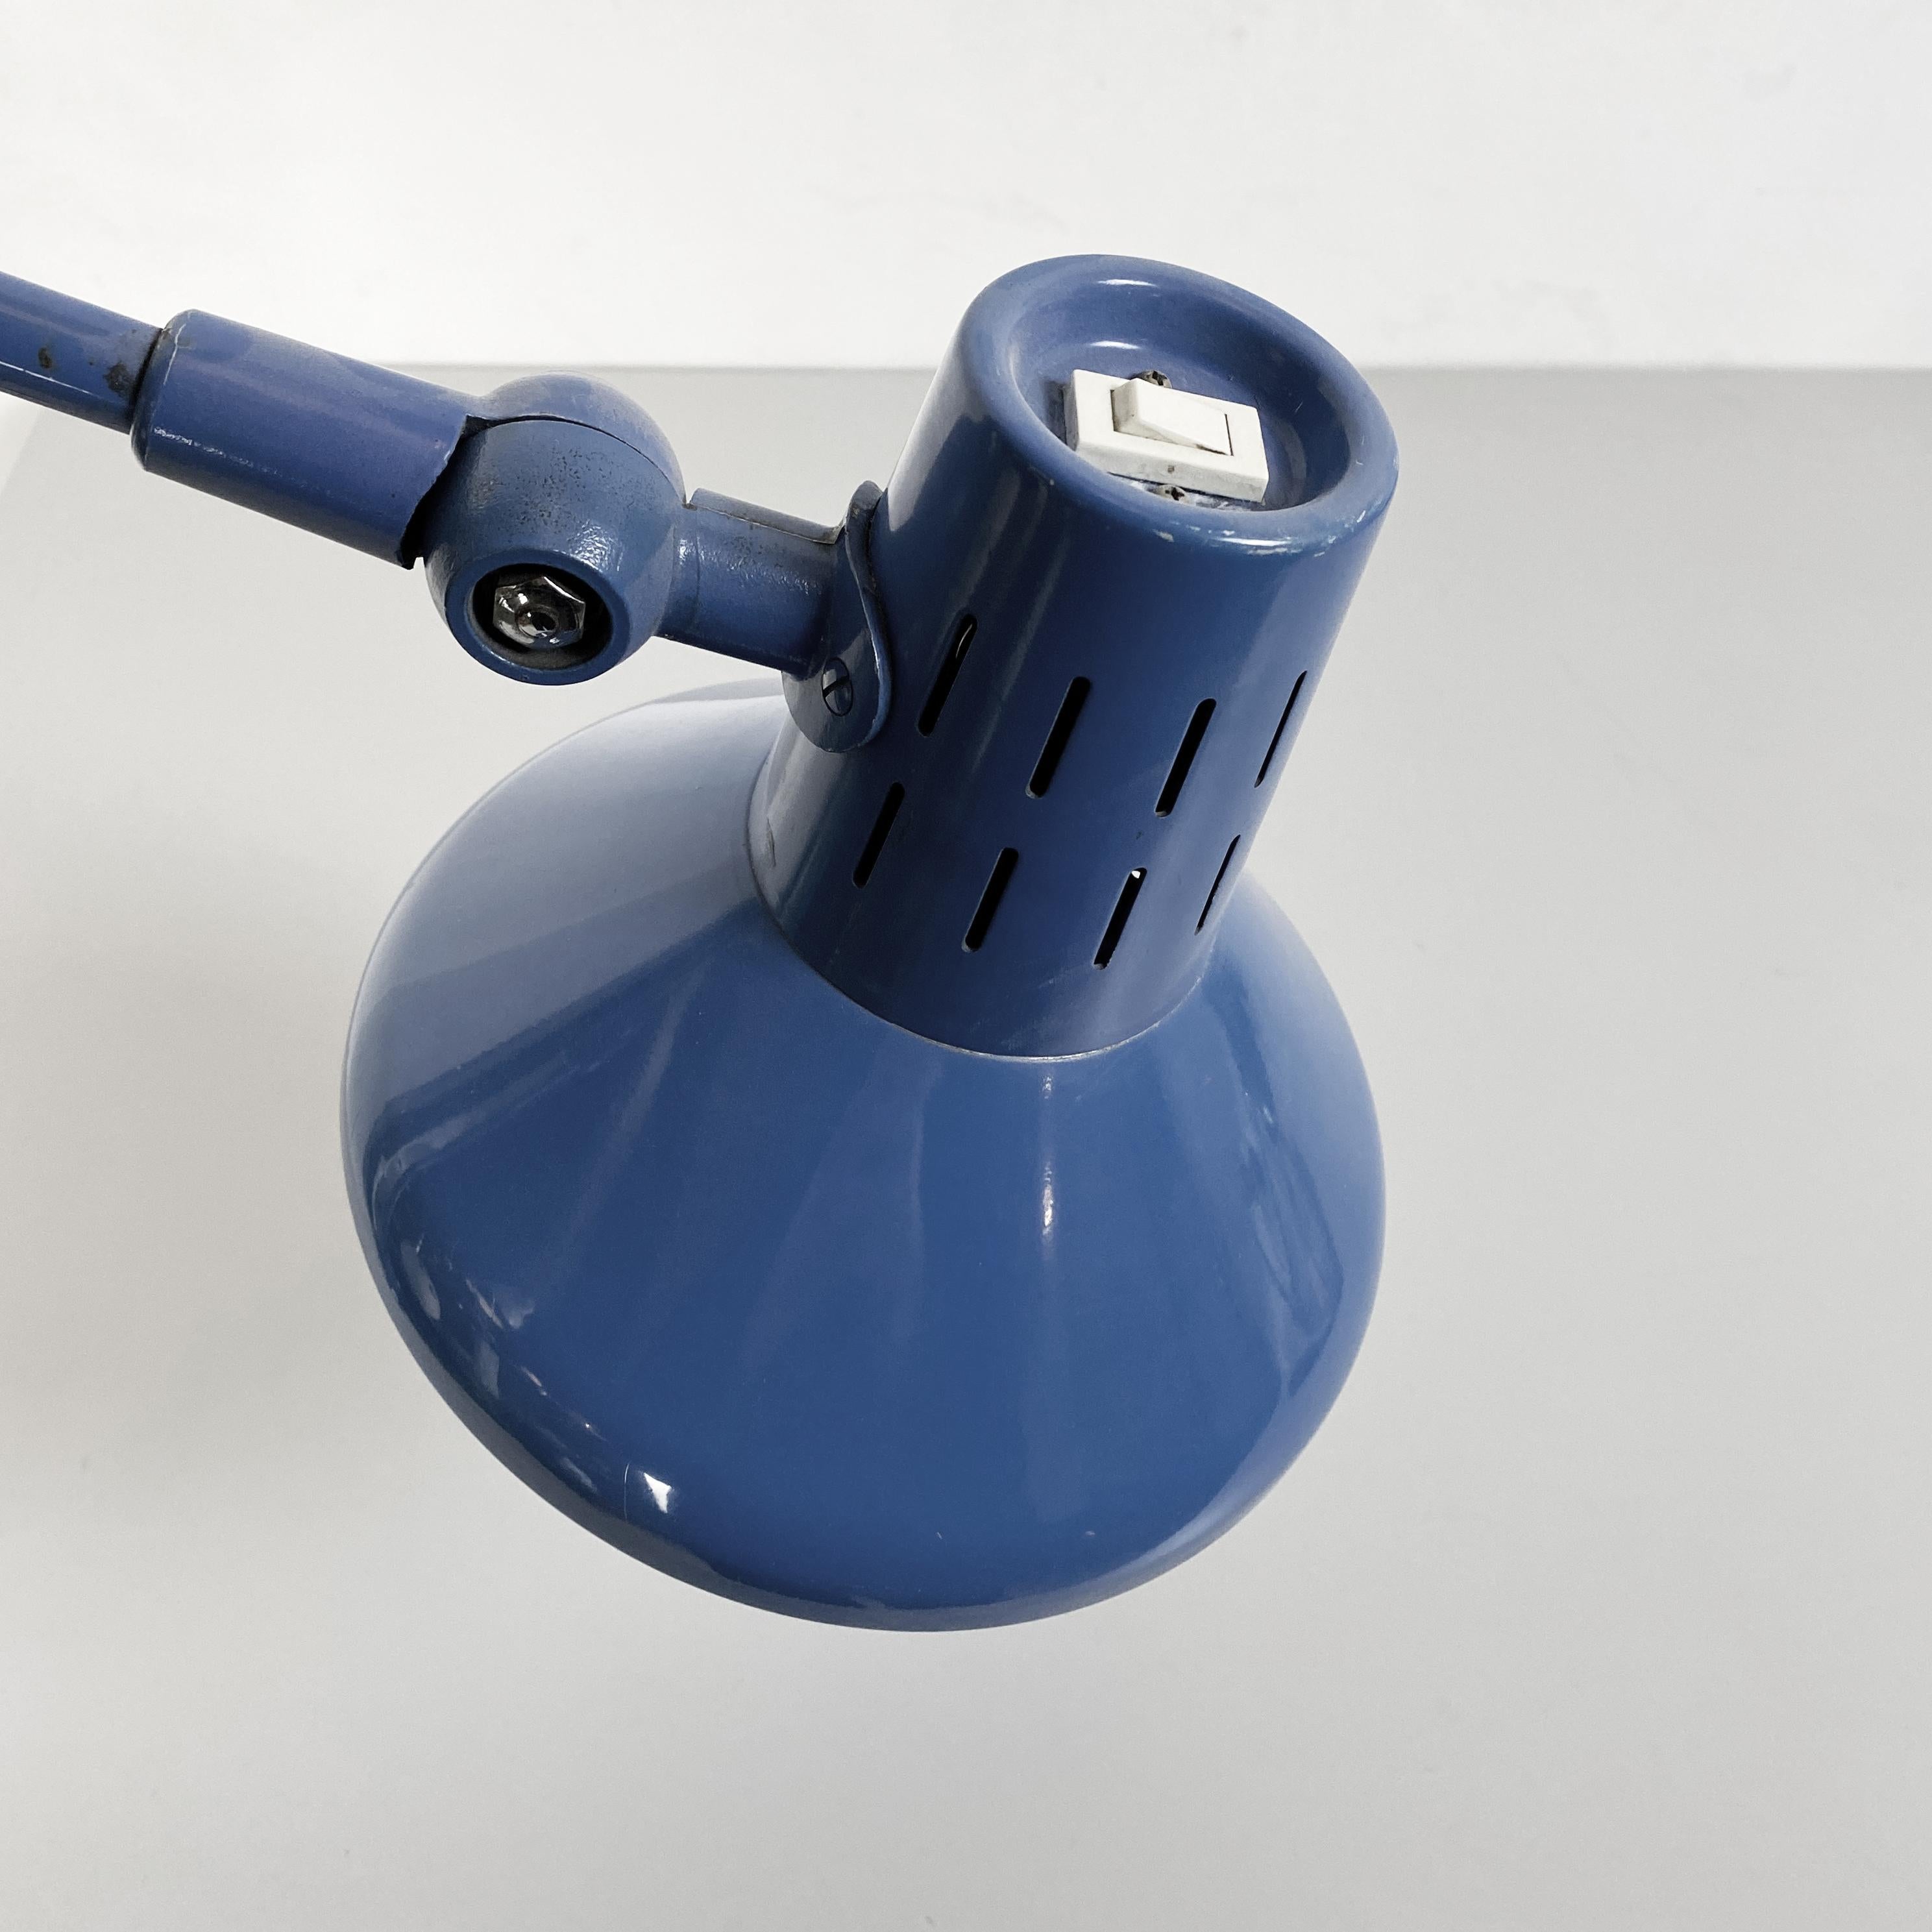 Italian Mid-Century Modern Blue Metal Table Lamp with Clamp, 1970s For Sale 3